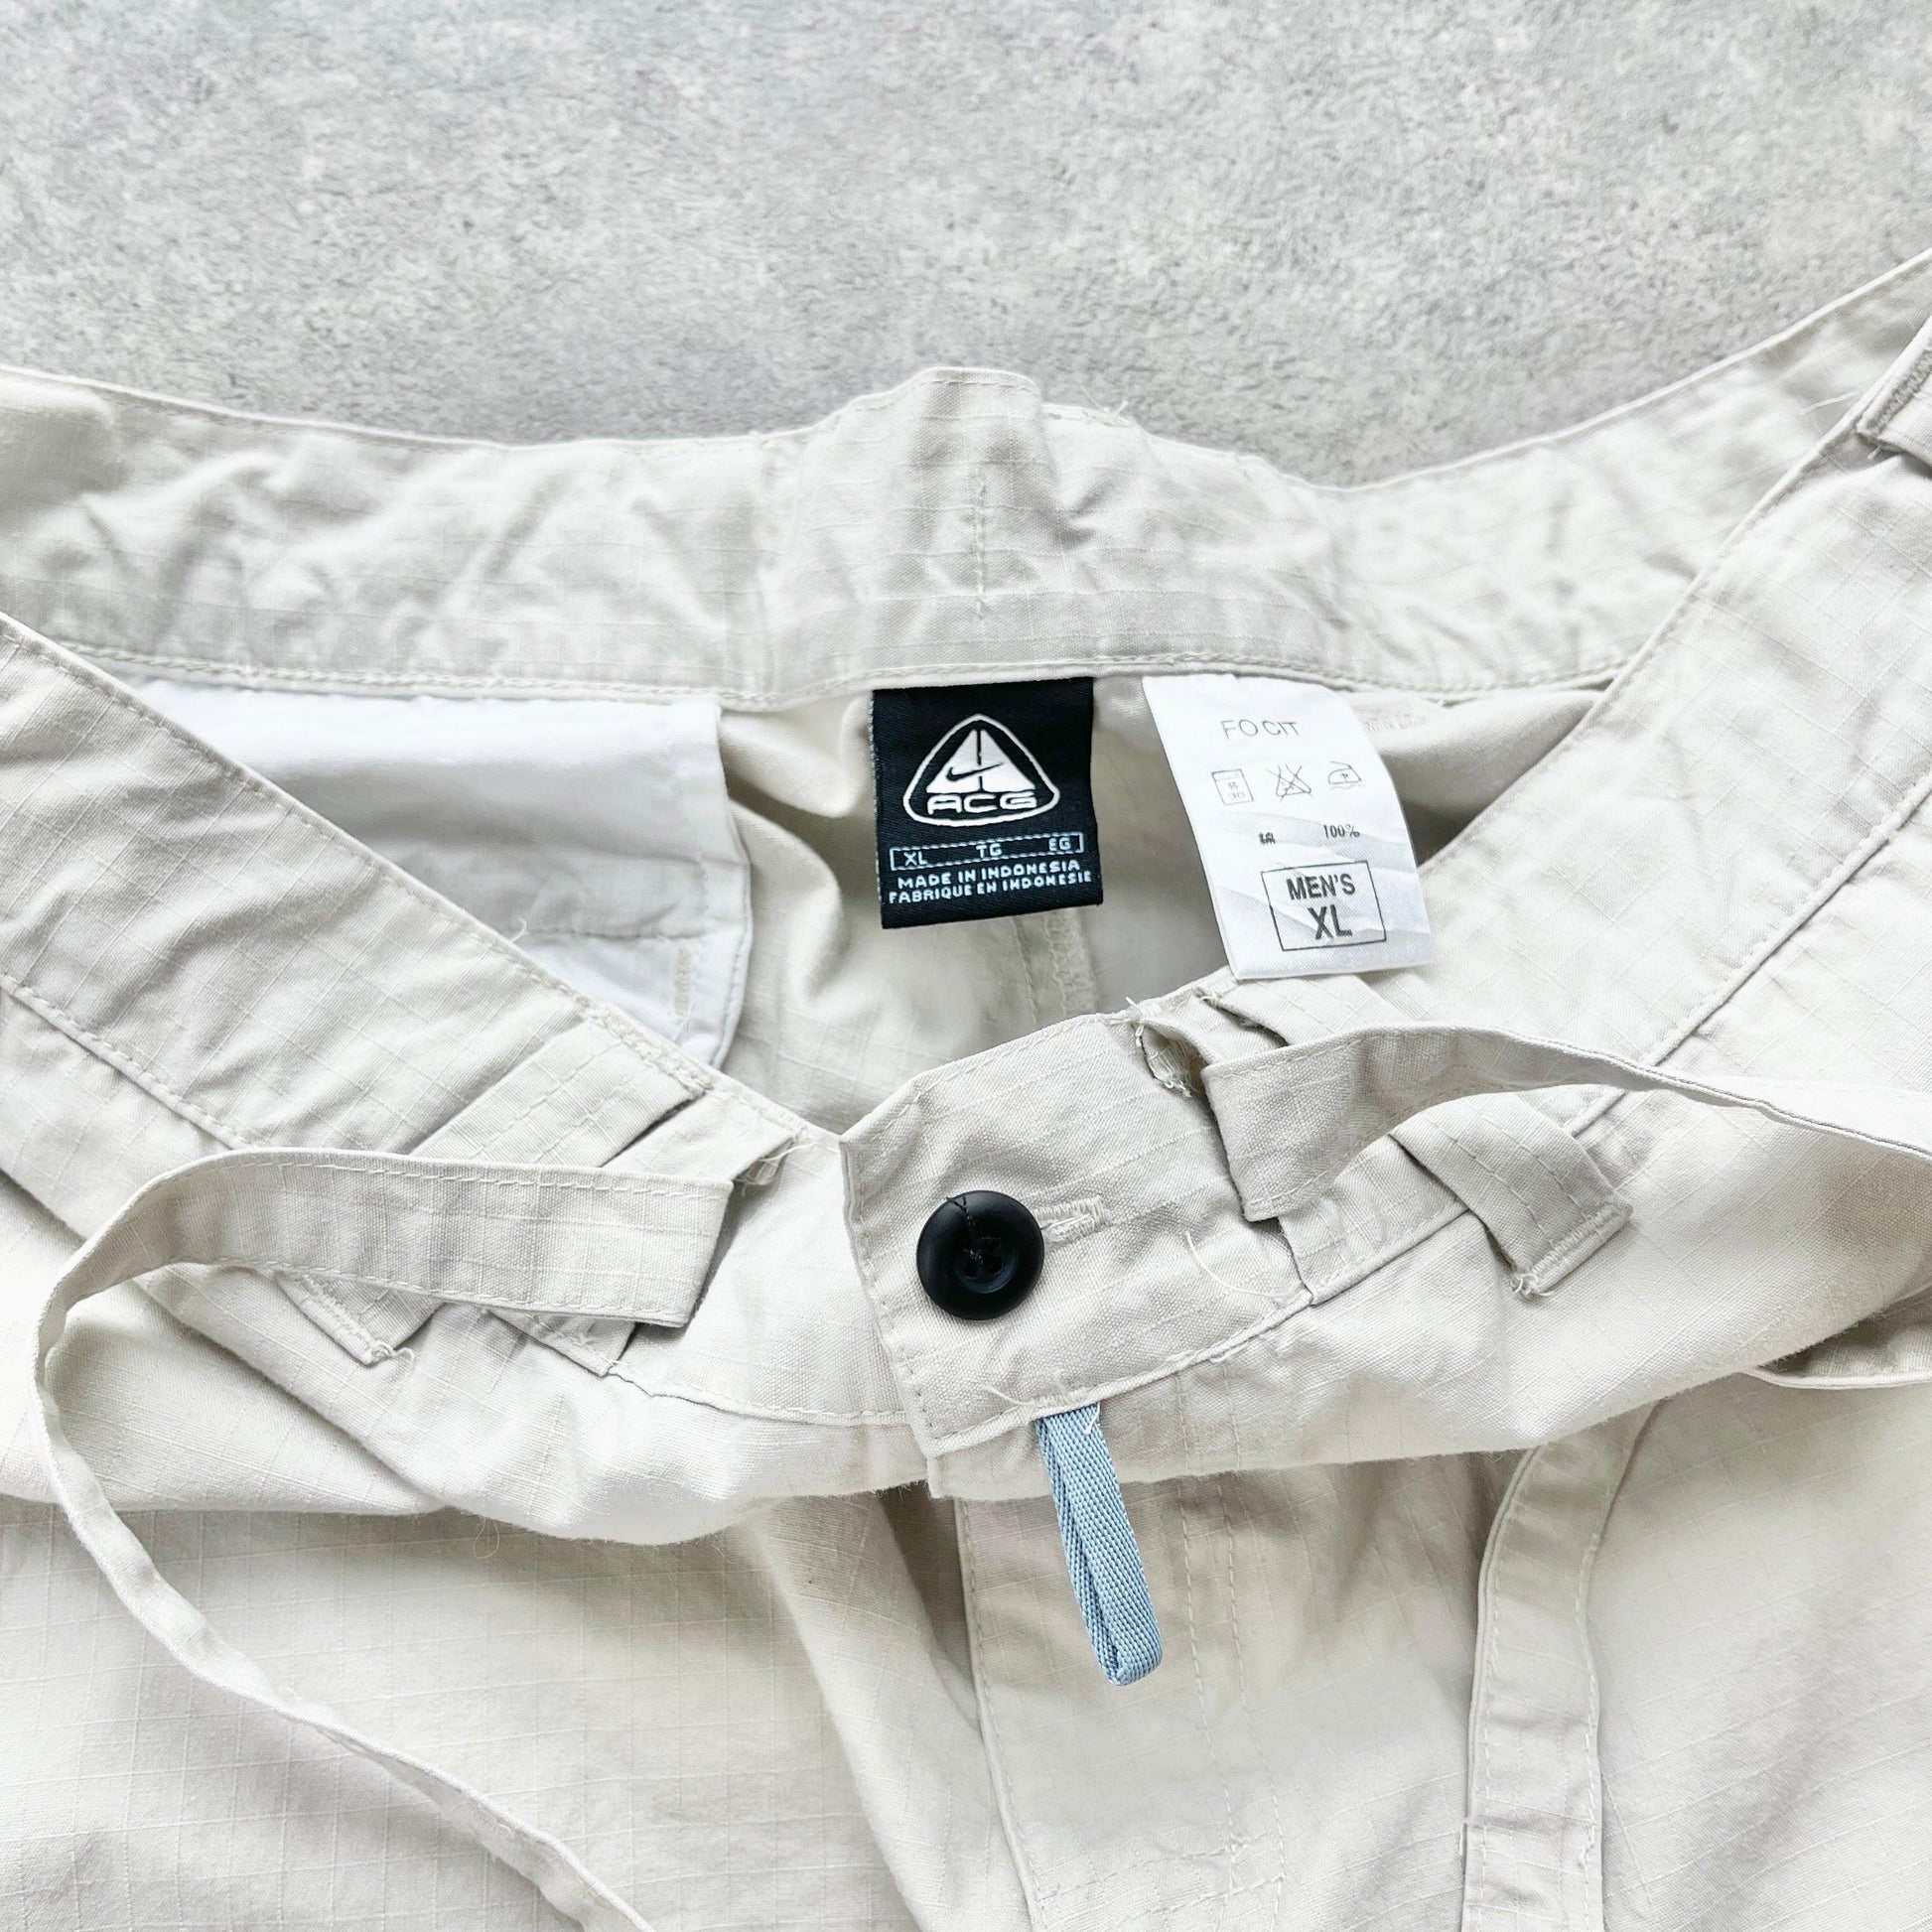 Nike ACG 2000s technical cargo trousers (XL) - Known Source